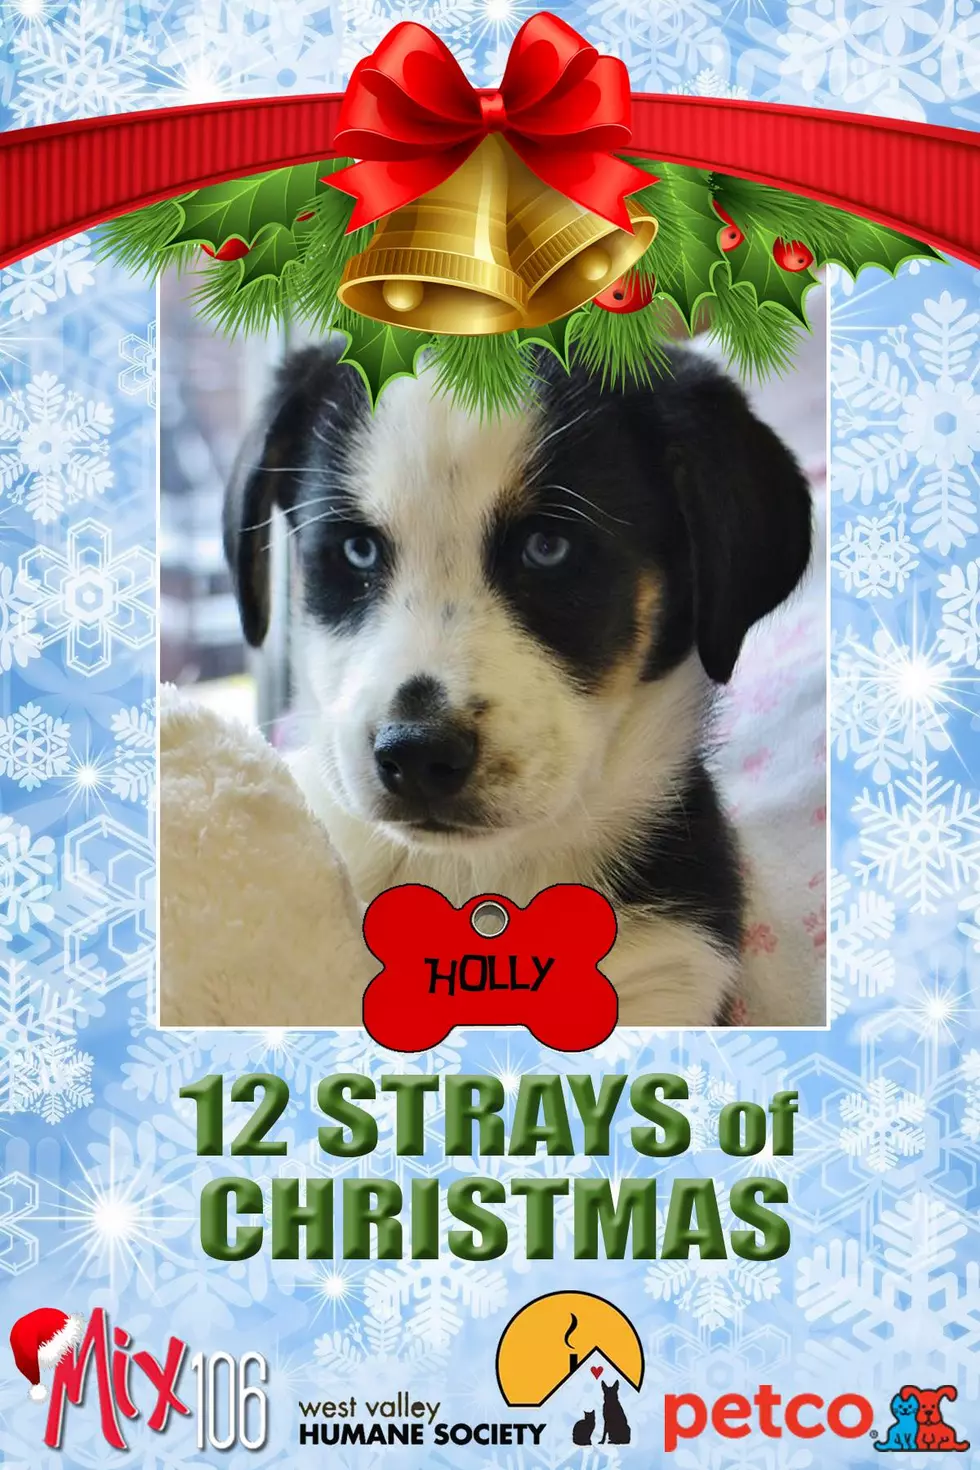 #1 of 12 Strays Of Christmas – Holly